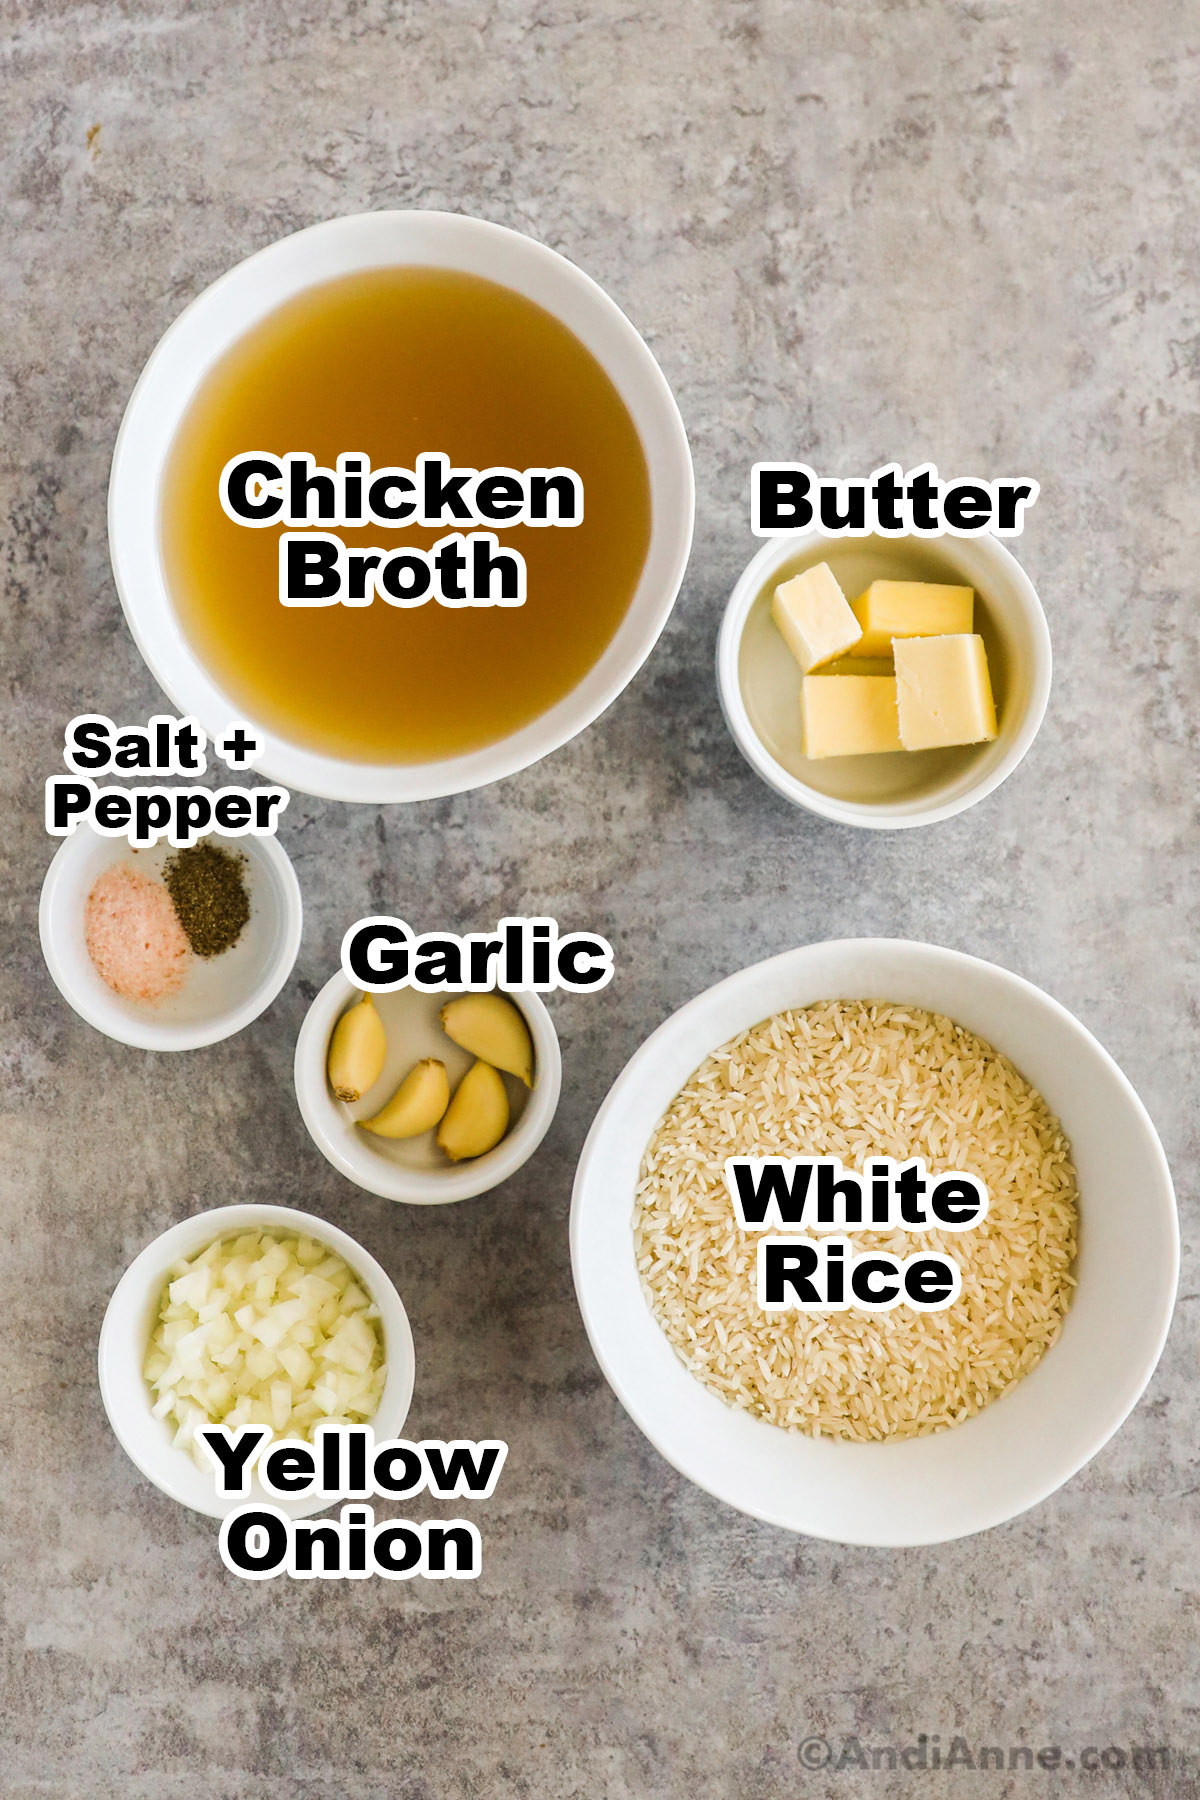 Recipe ingredients on the counter including bowl of chicken broth, bowl of cubed butter, bowls of garlic cloves, uncooked white rice, chopped yellow onion.